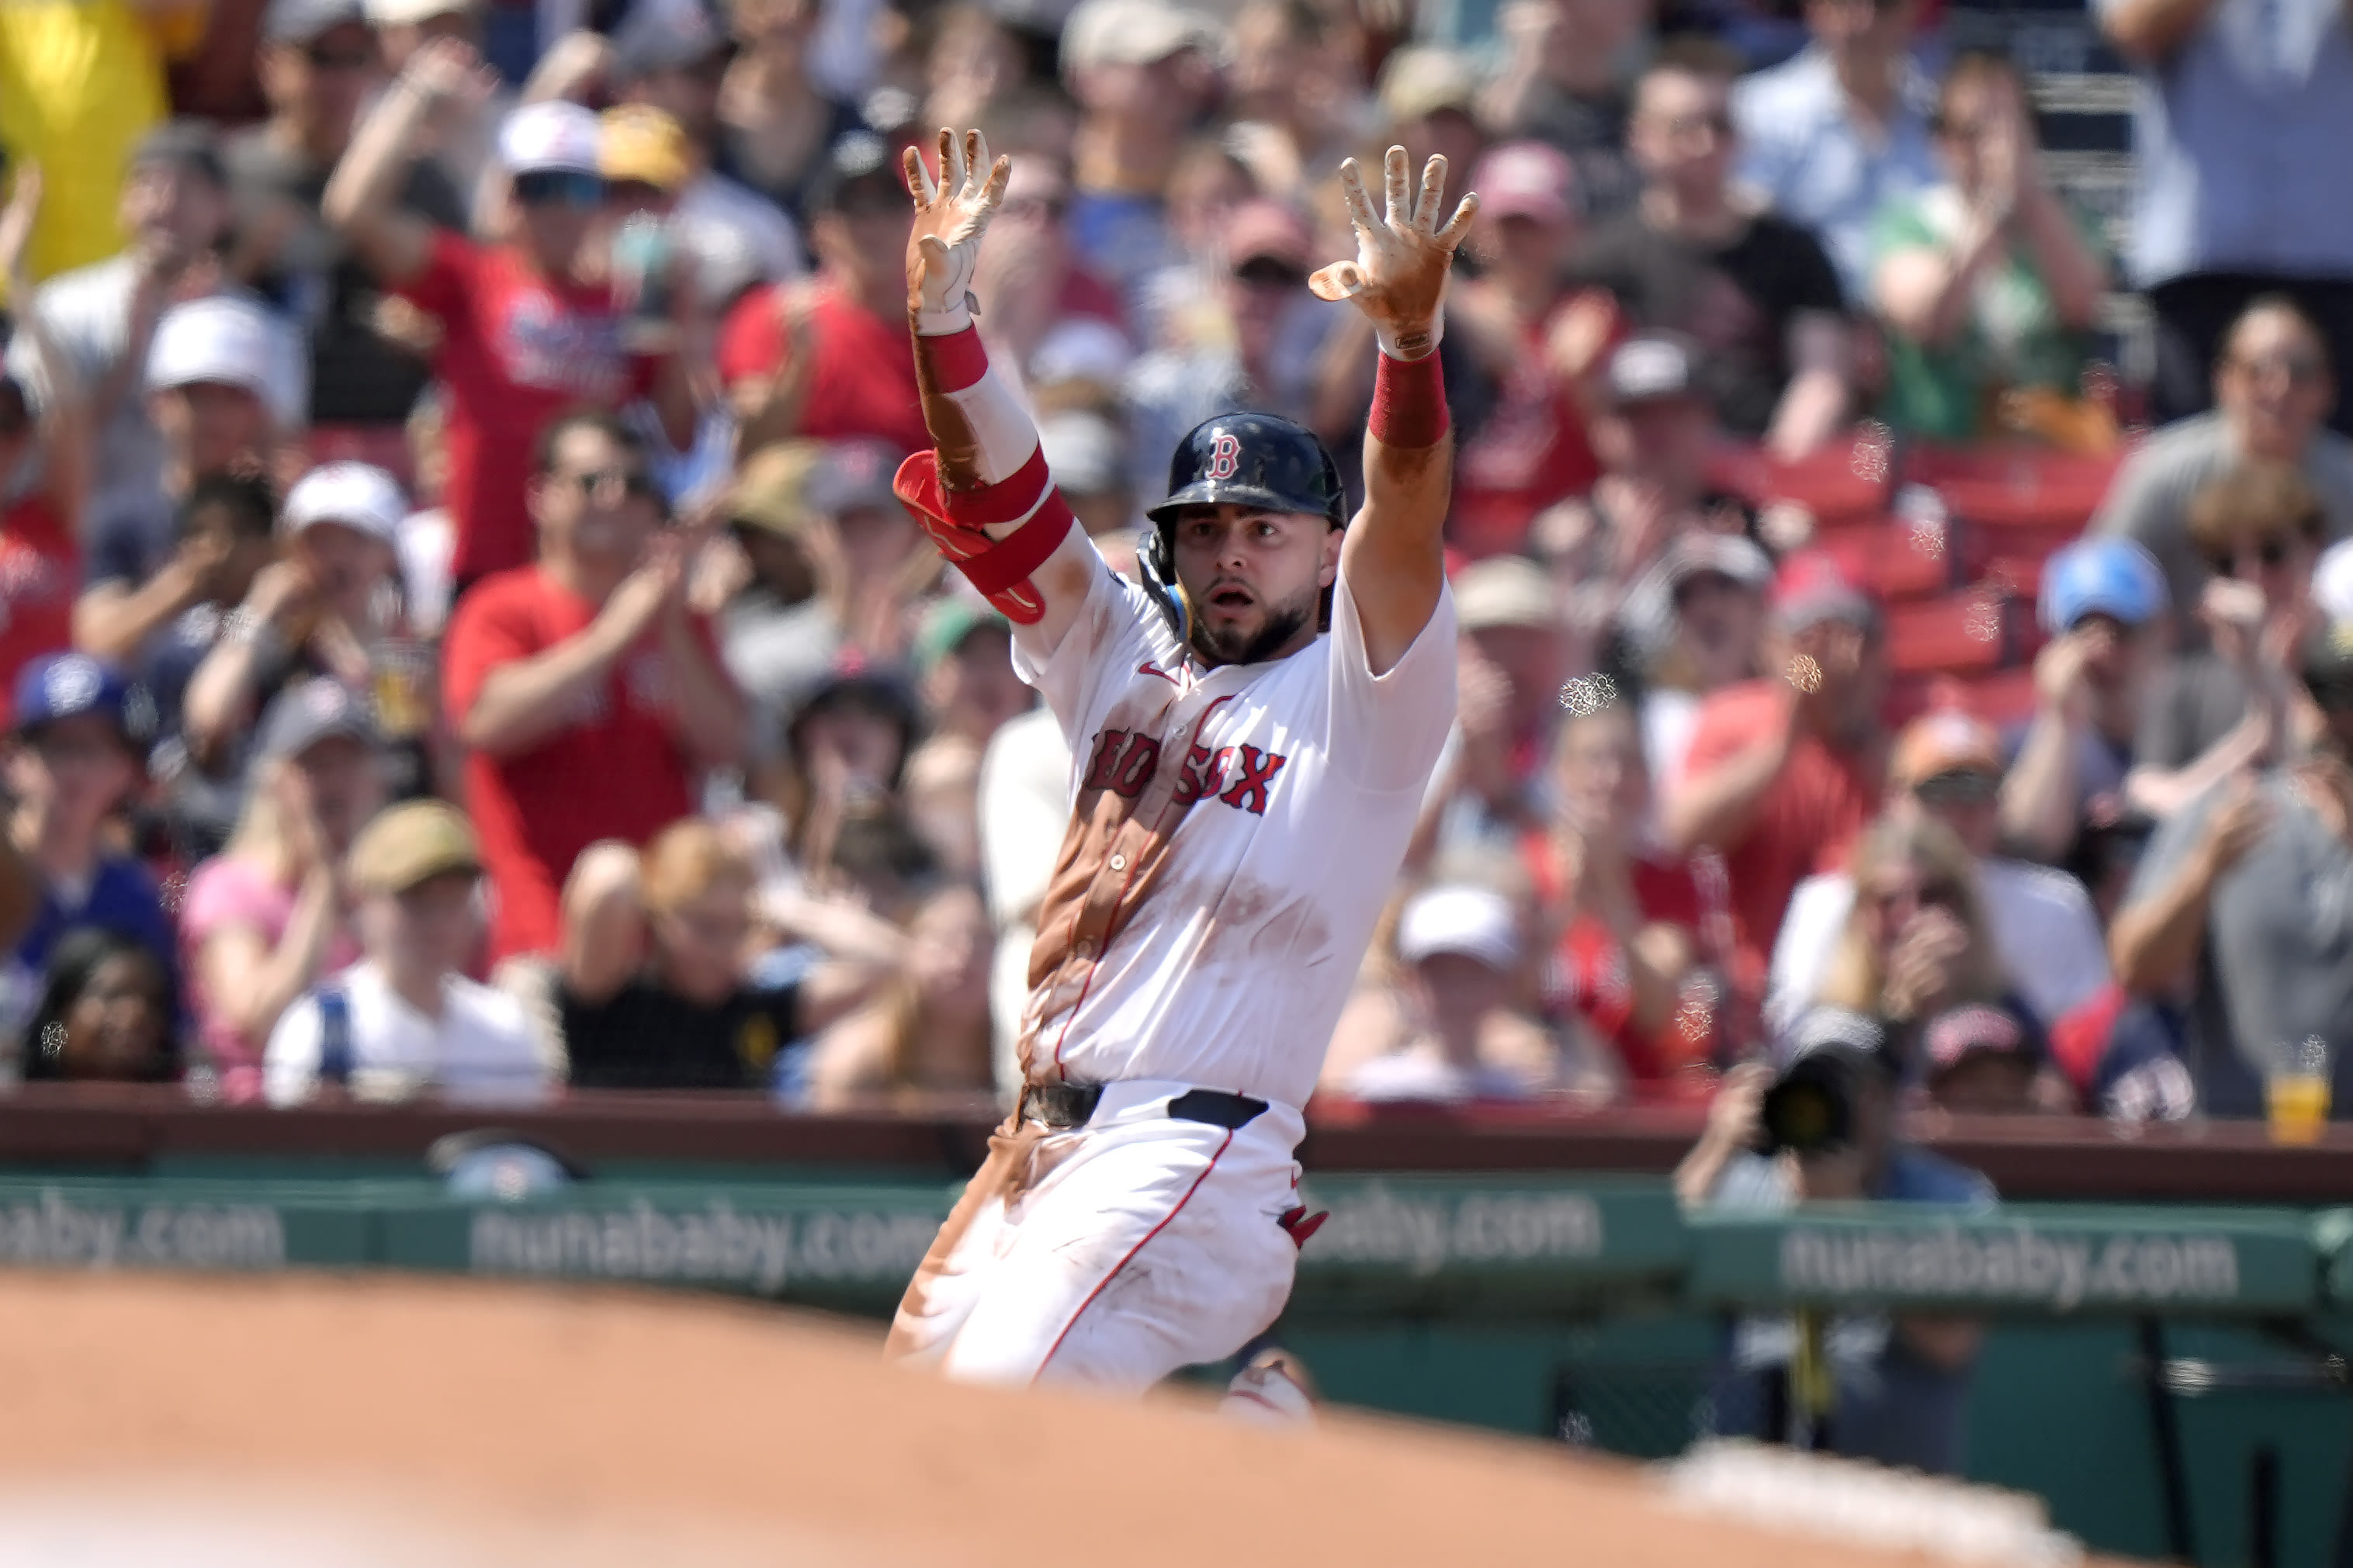 Duran's RBI single lifts Red Sox past Brewers 2-1 in game that sees benches empty